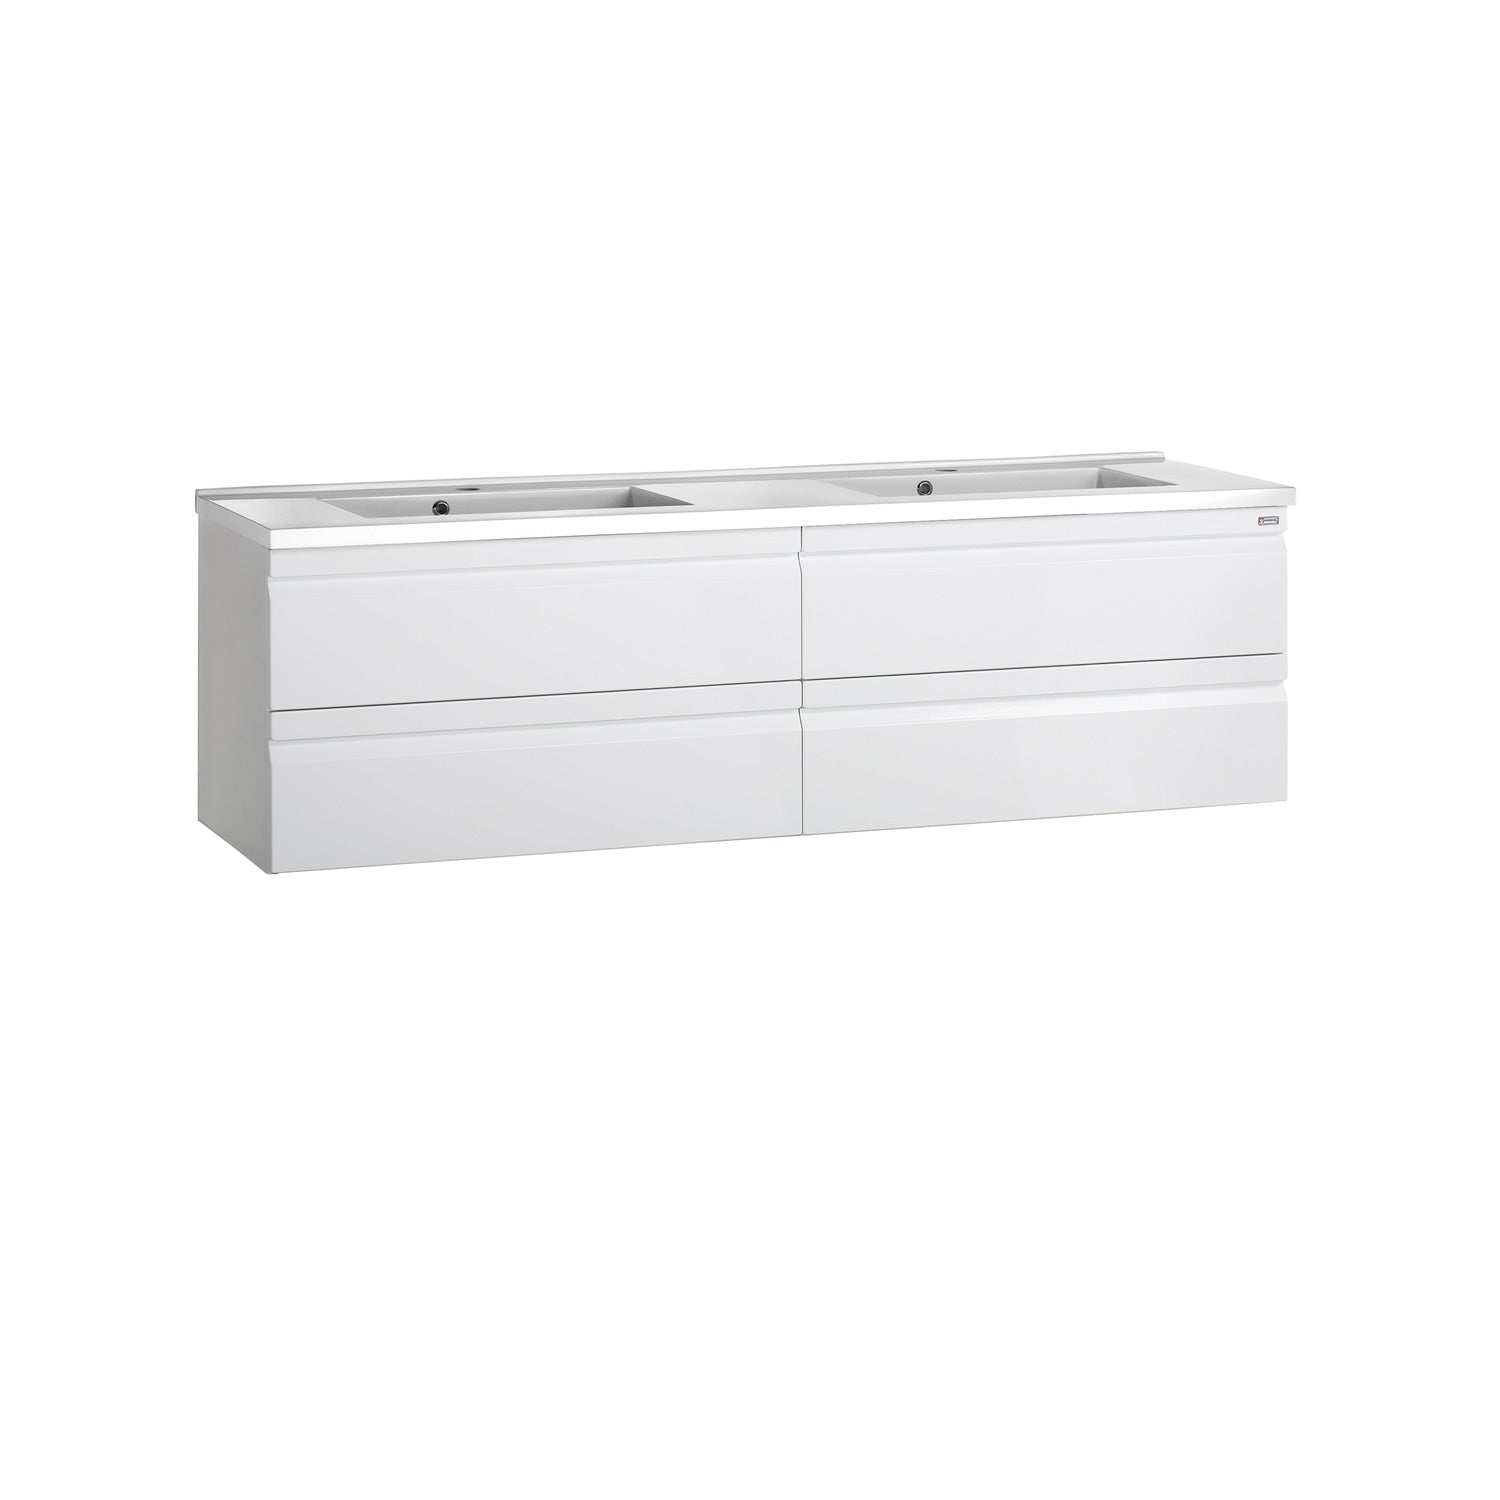 80" Double Vanity, Wall Mount, 4 Drawers with Soft Close, White, Serie Solco by VALENZUELA